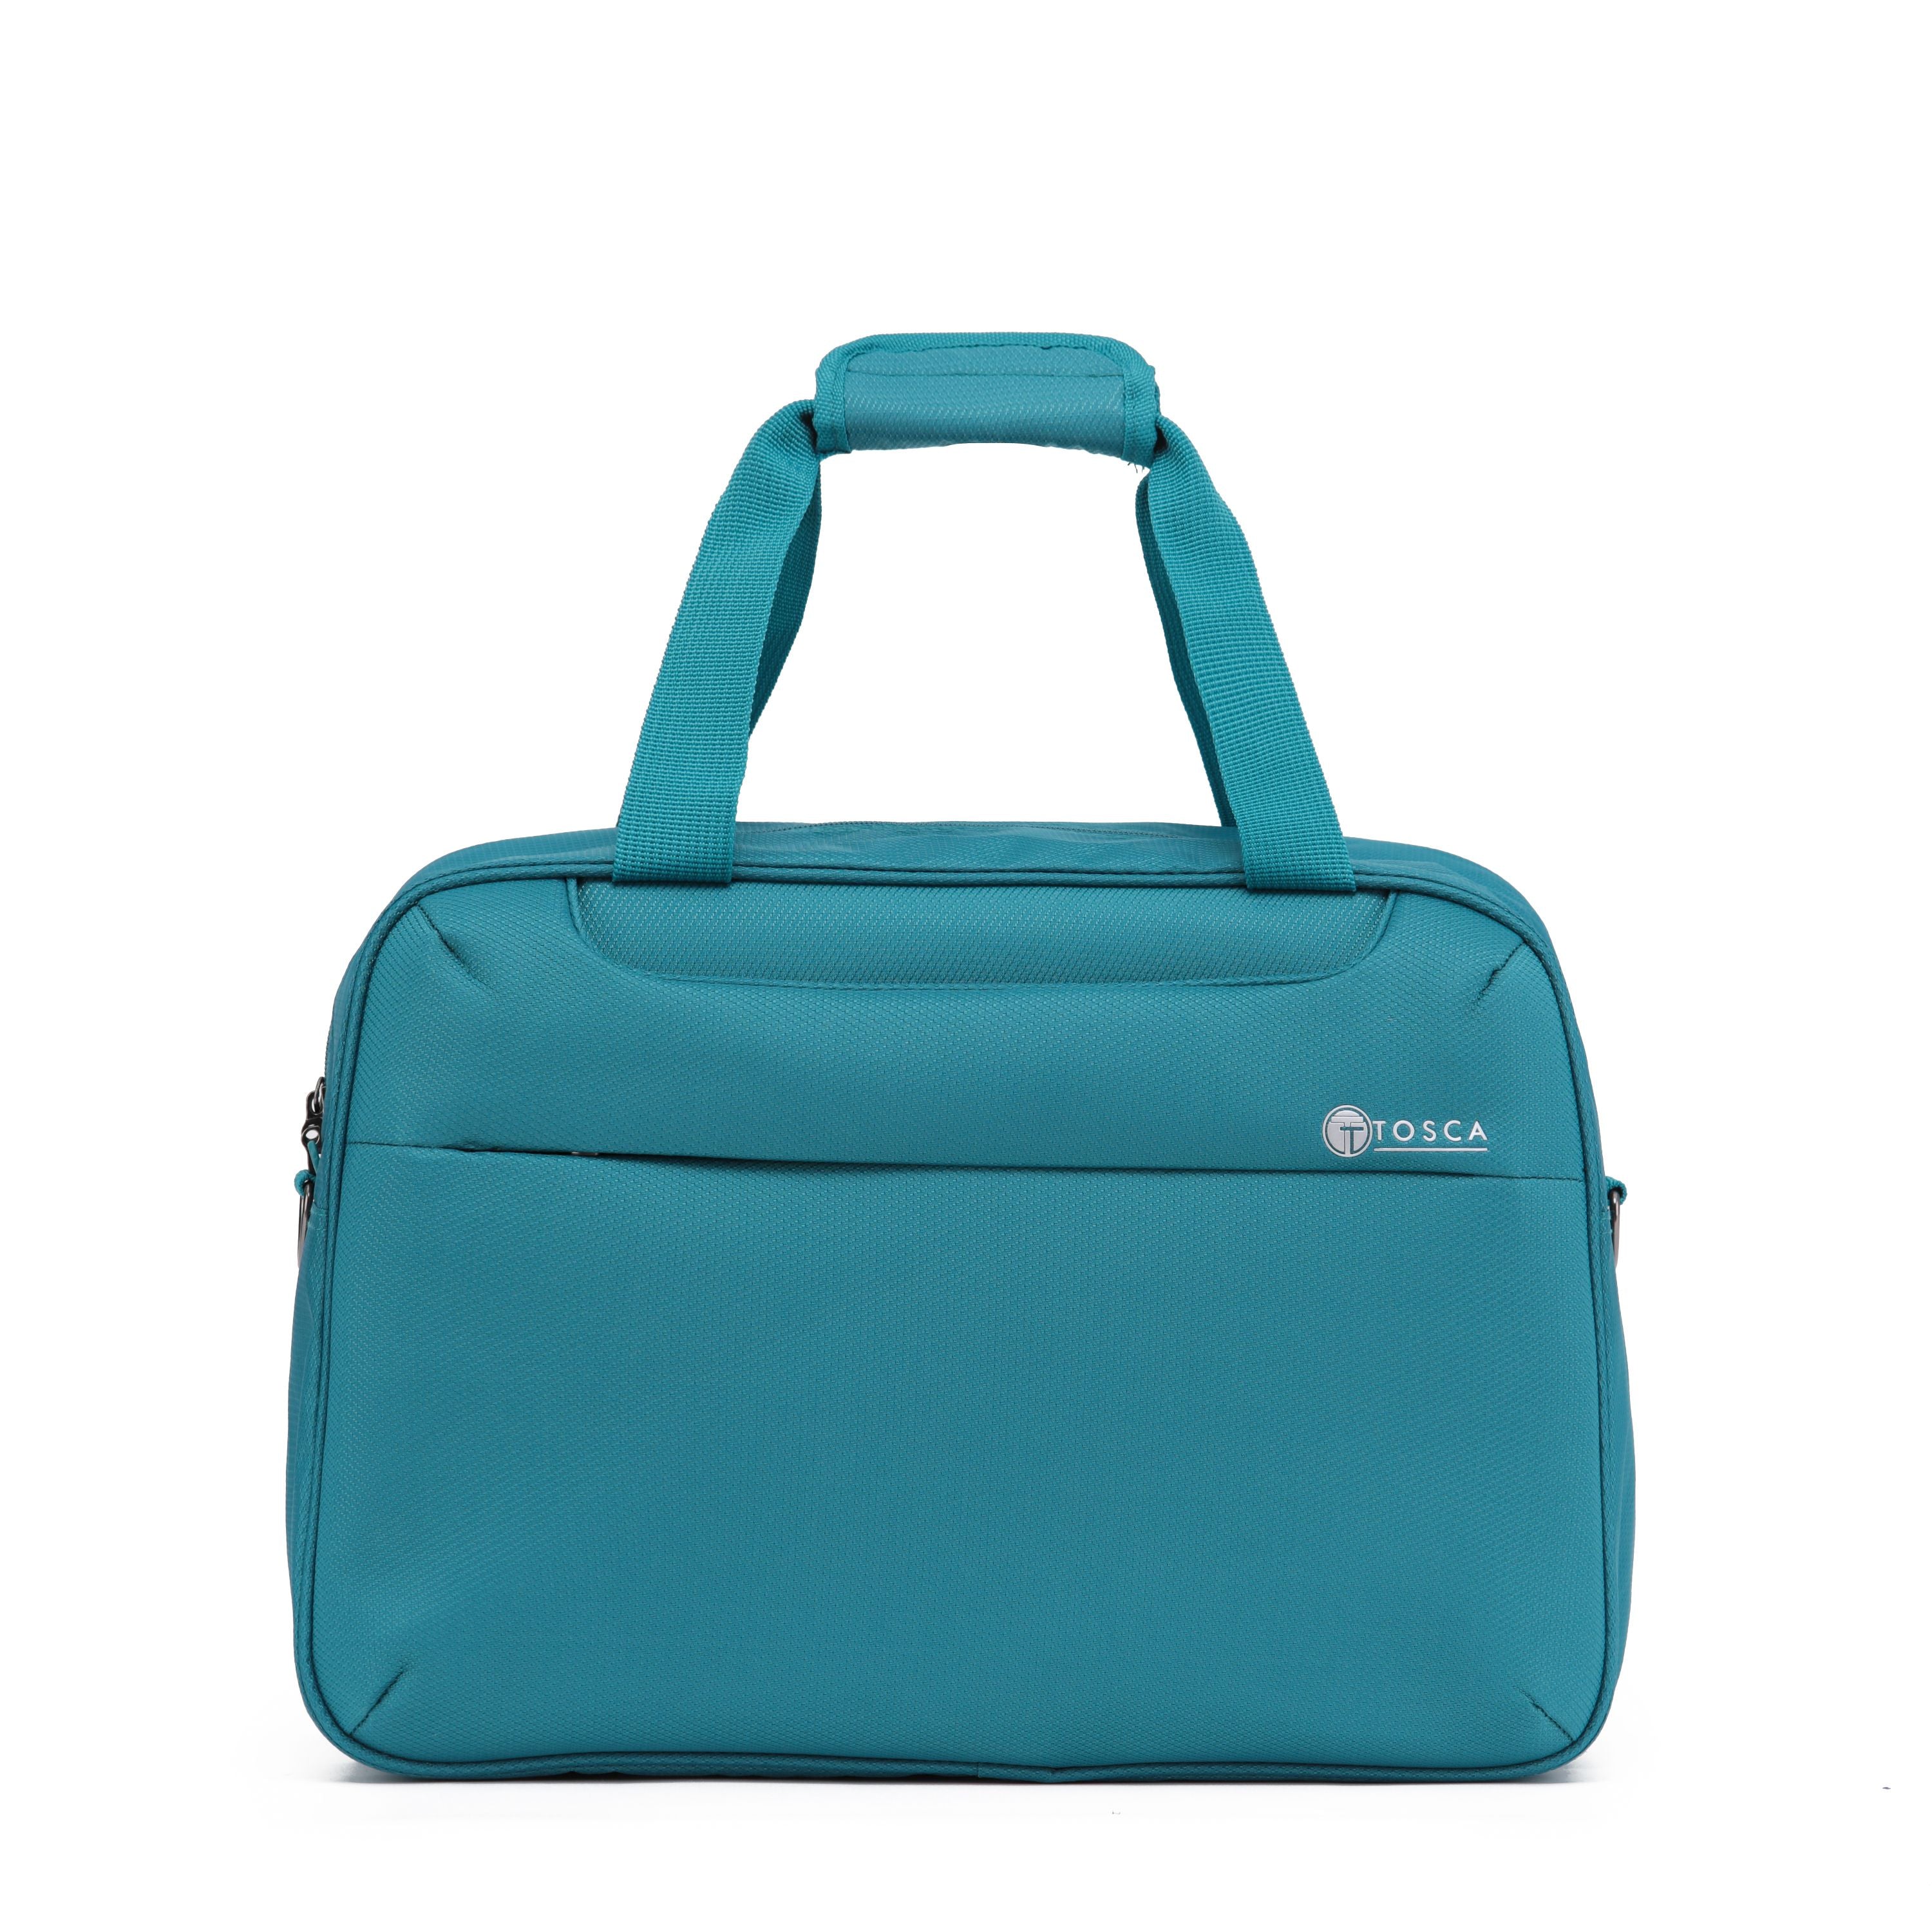 Tosca - So Lite 3.0 Onboard Tote - Teal-1